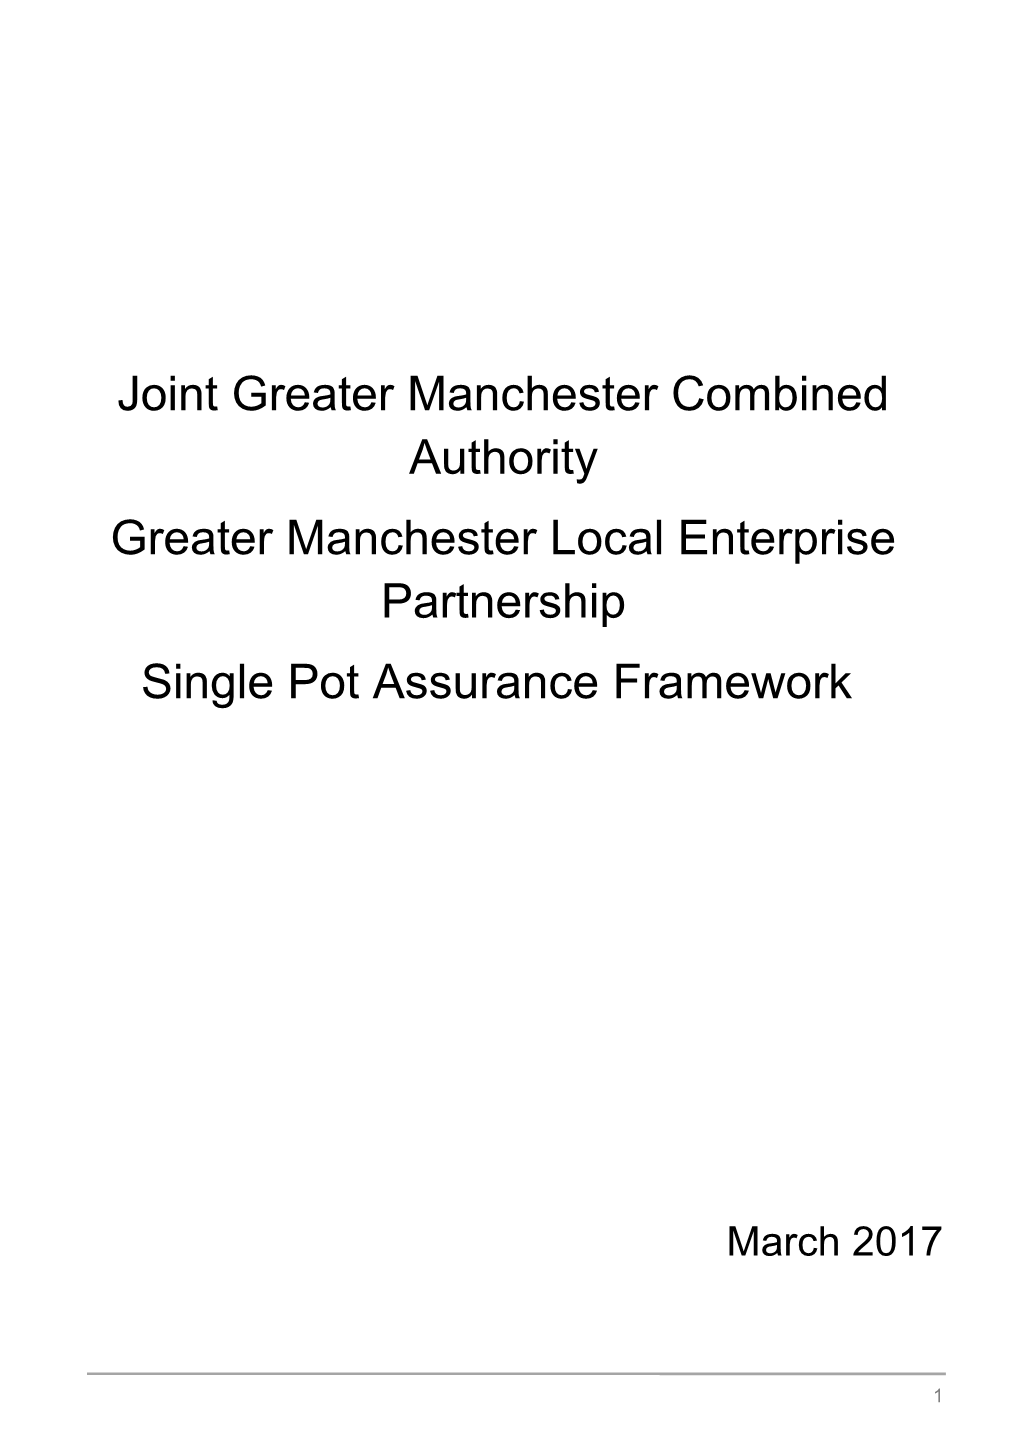 Joint Greater Manchester Combined Authority